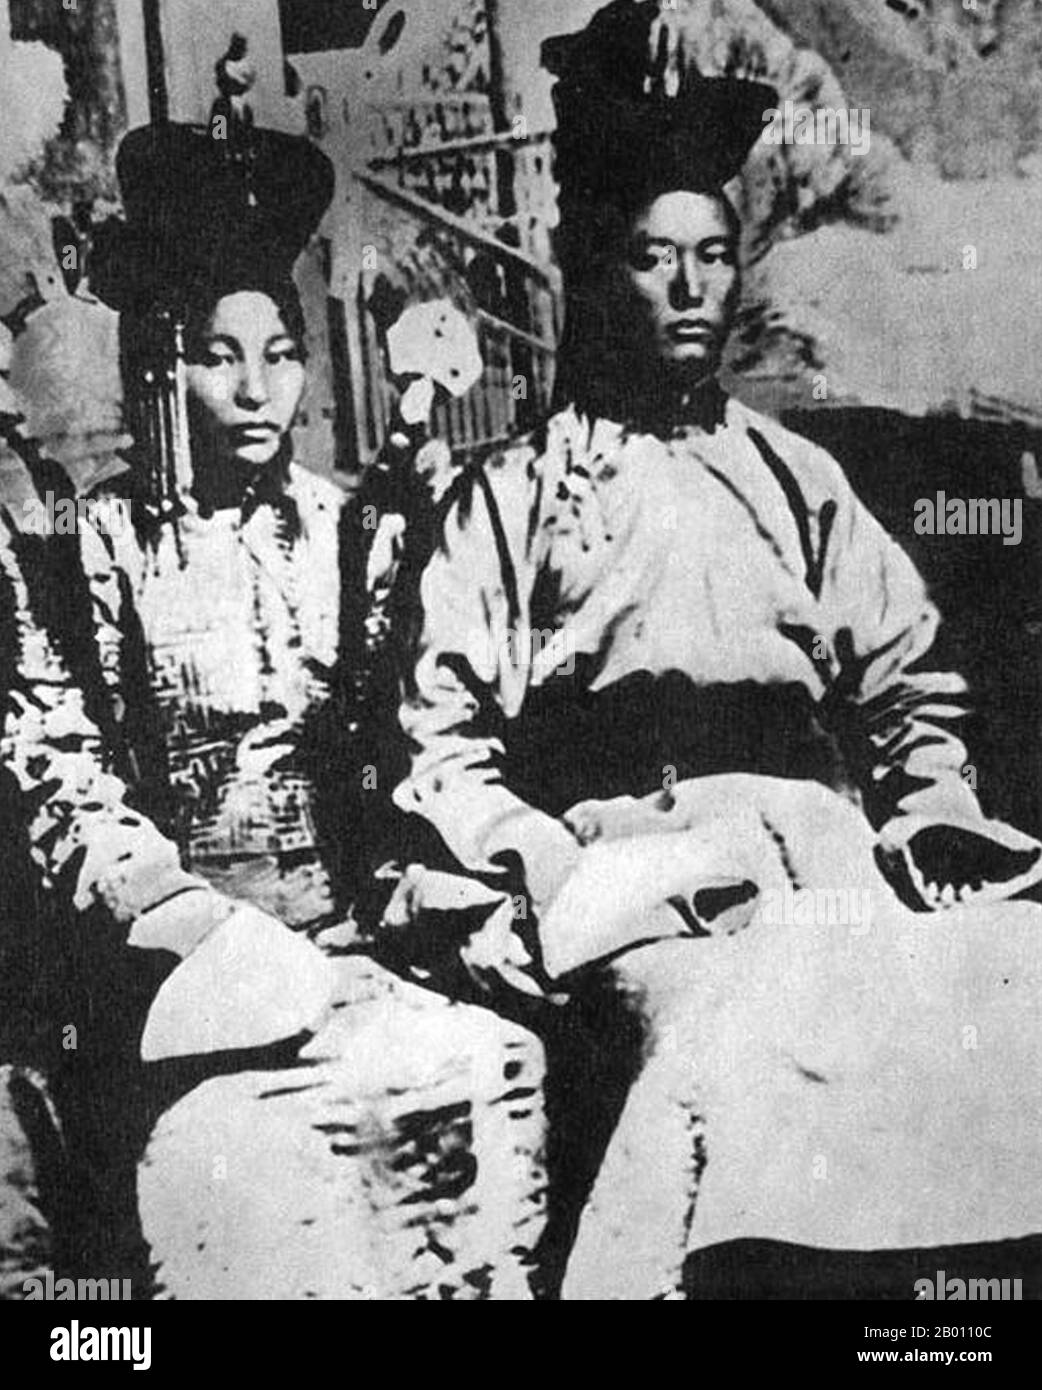 Mongolia: Damdin Sukhbaatar (1893-1923) military leader, nationalist and revolutionary, with his wife, Sukhbaataryn Yanjmaa, at Urga (Ulan Bataar), 1919.  Damdin Sukhbaatar (February 2, 1893 - February 20, 1923) was a Mongolian military leader in the 1921 revolution. He is remembered as one of the most important figures in Mongolia's struggle for independence.  Sukhbaataryn Yanjmaa (1893-1963) served on the politburo of the Mongolian People's Revolutionary Party from 1940 until 1954, and was Secretary of the party's Central Committee from 1941 until 1947. Stock Photo